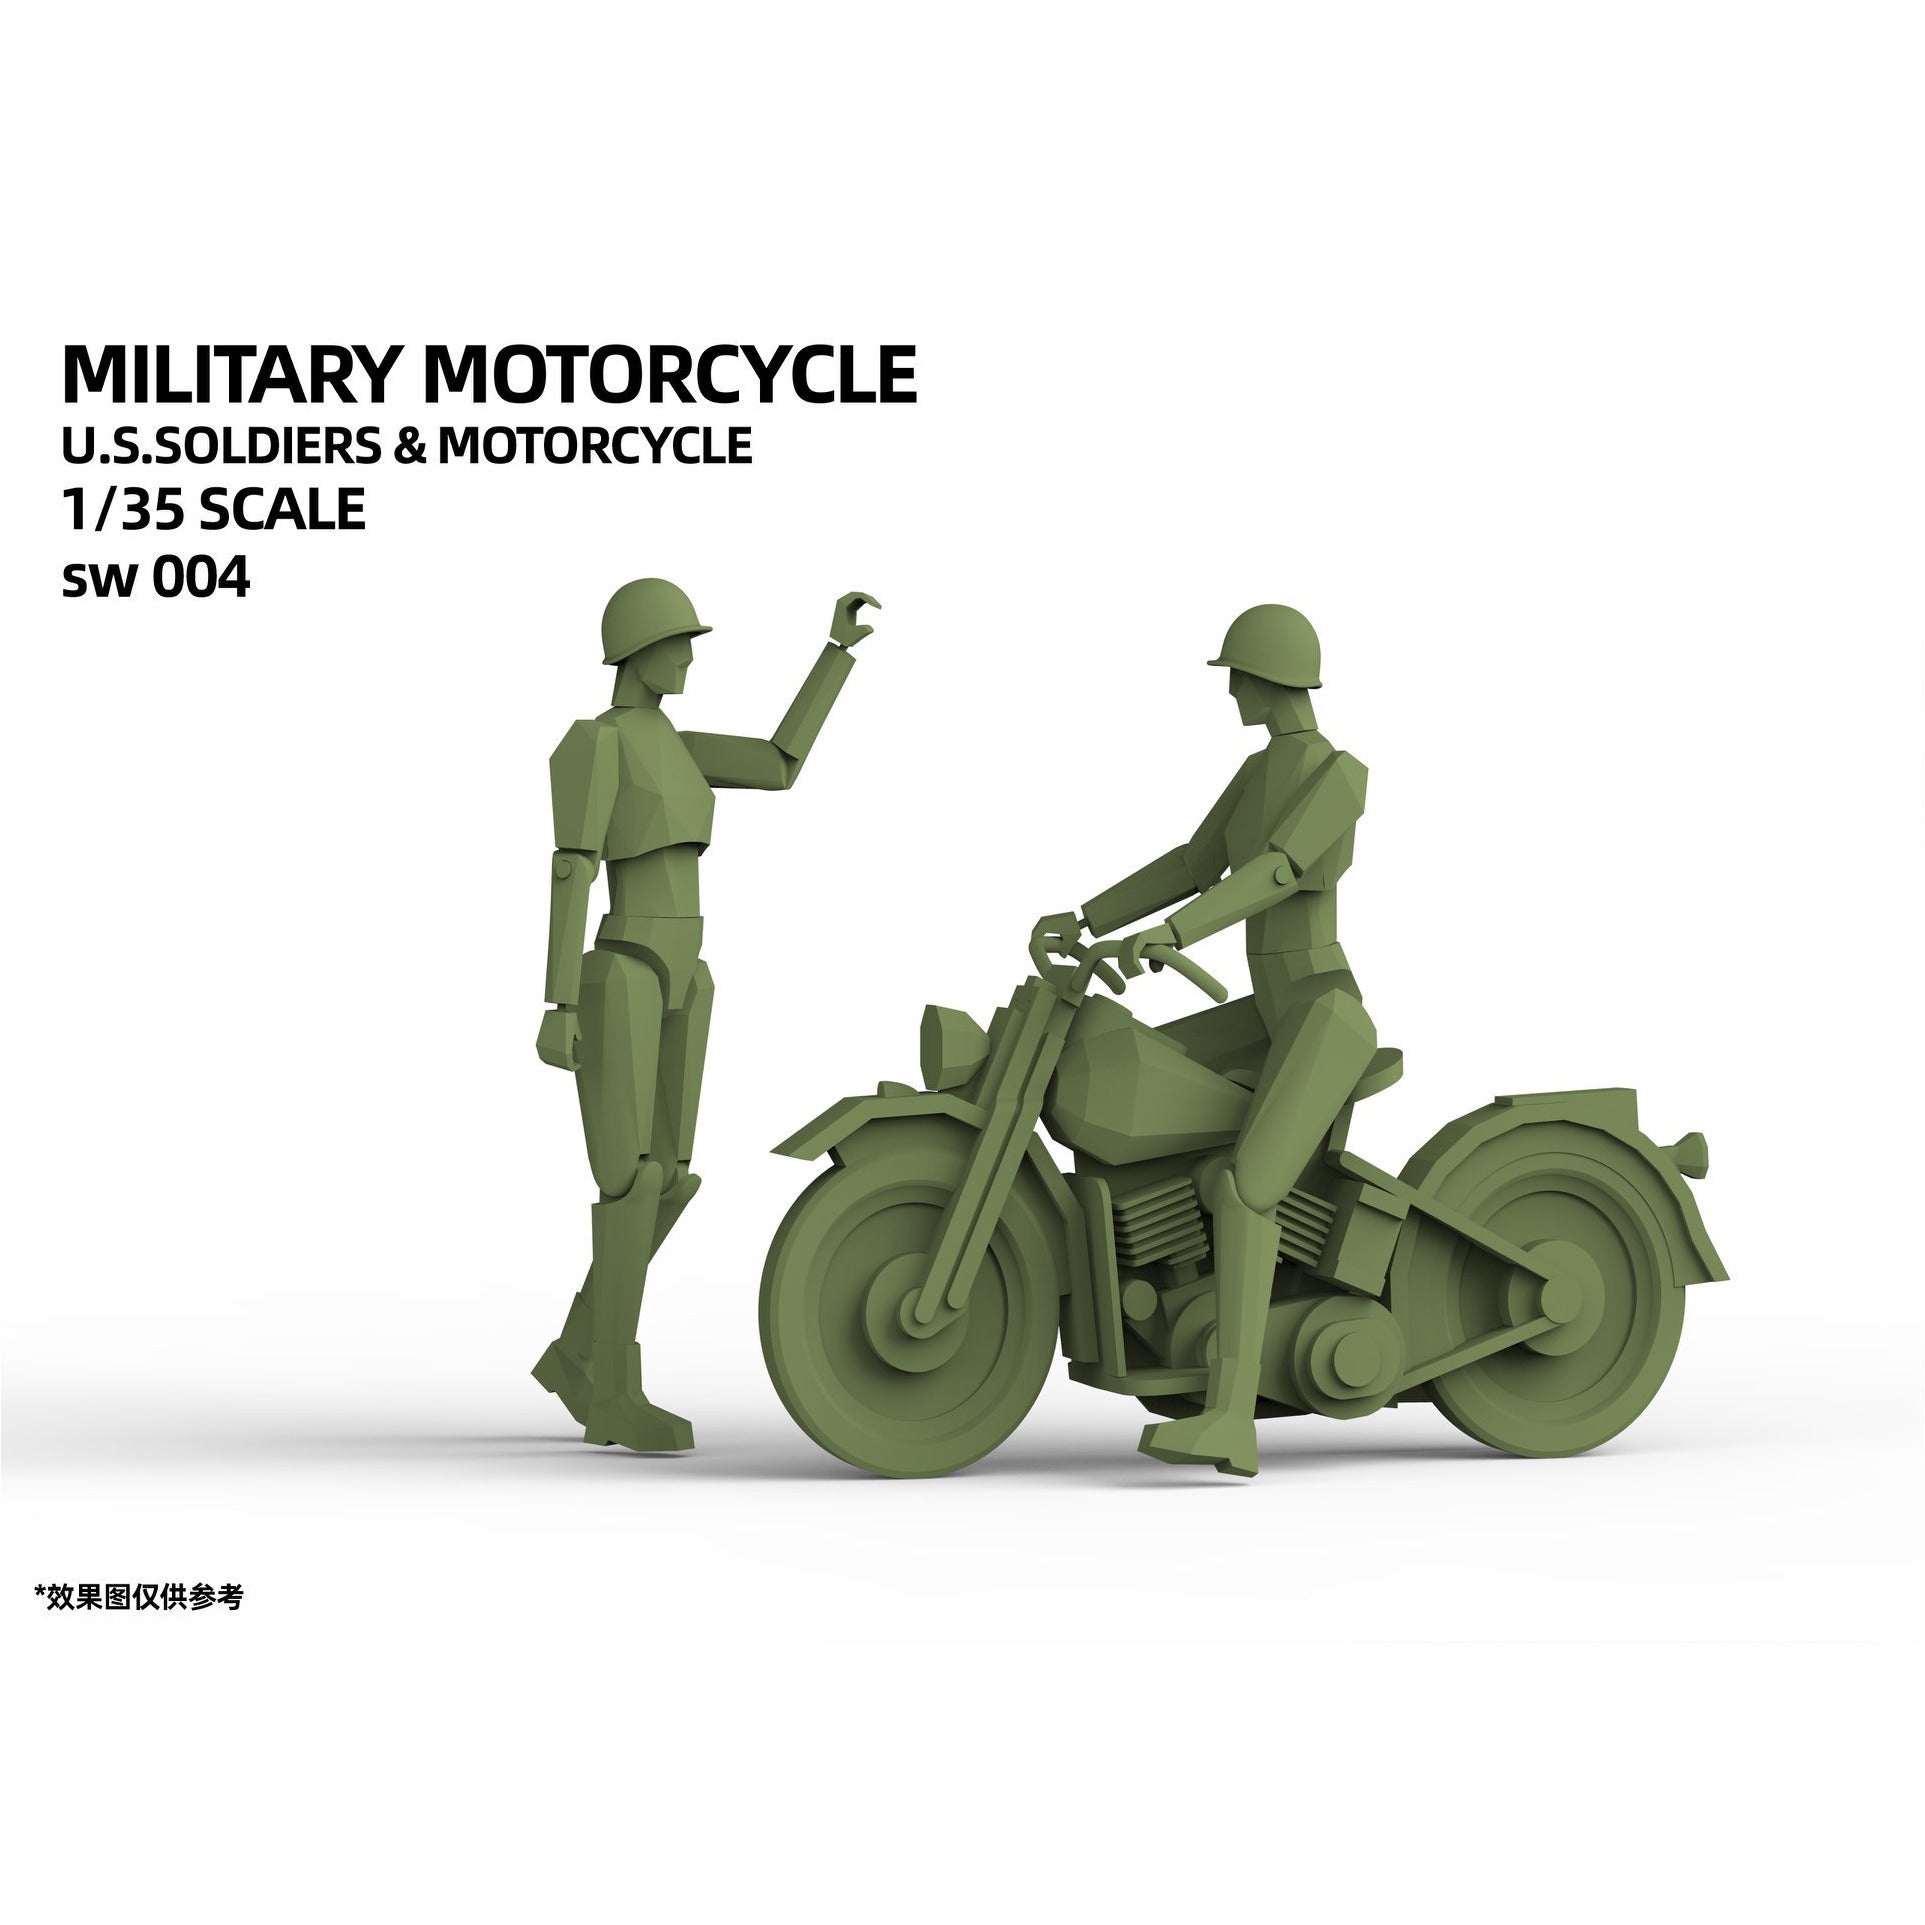 Military Motorcycle with US Soldiers 1/35 #SW004 by Suyata